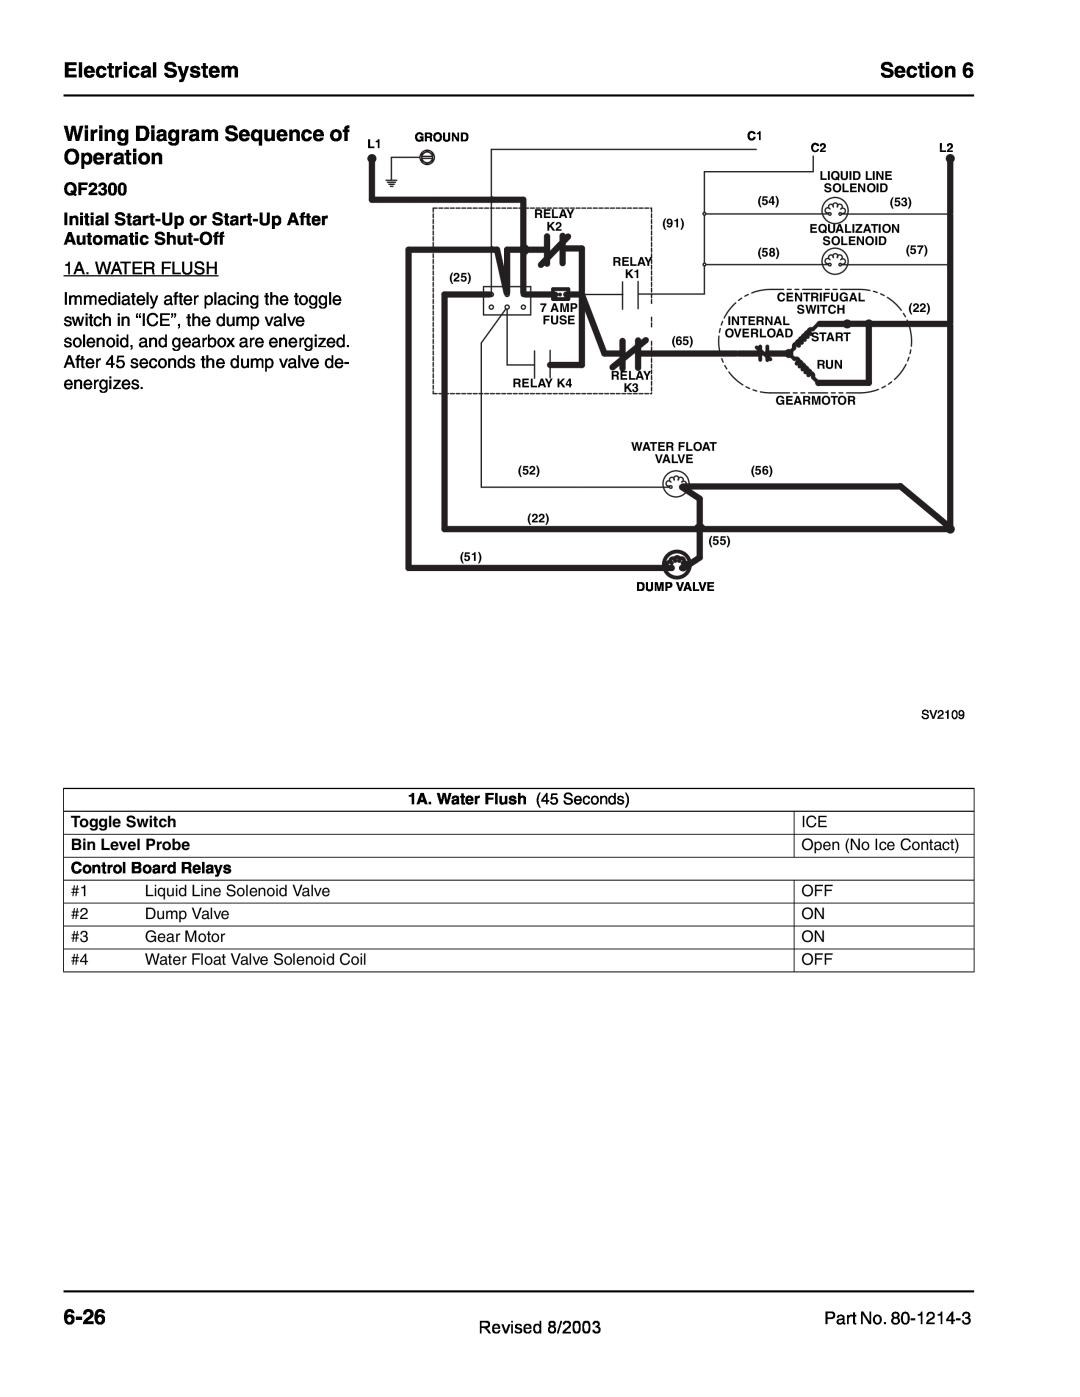 Manitowoc Ice QF0400, QF0800, QC0700, QF2200 Electrical System, Section, Wiring Diagram Sequence of Operation, 6-26, QF2300 